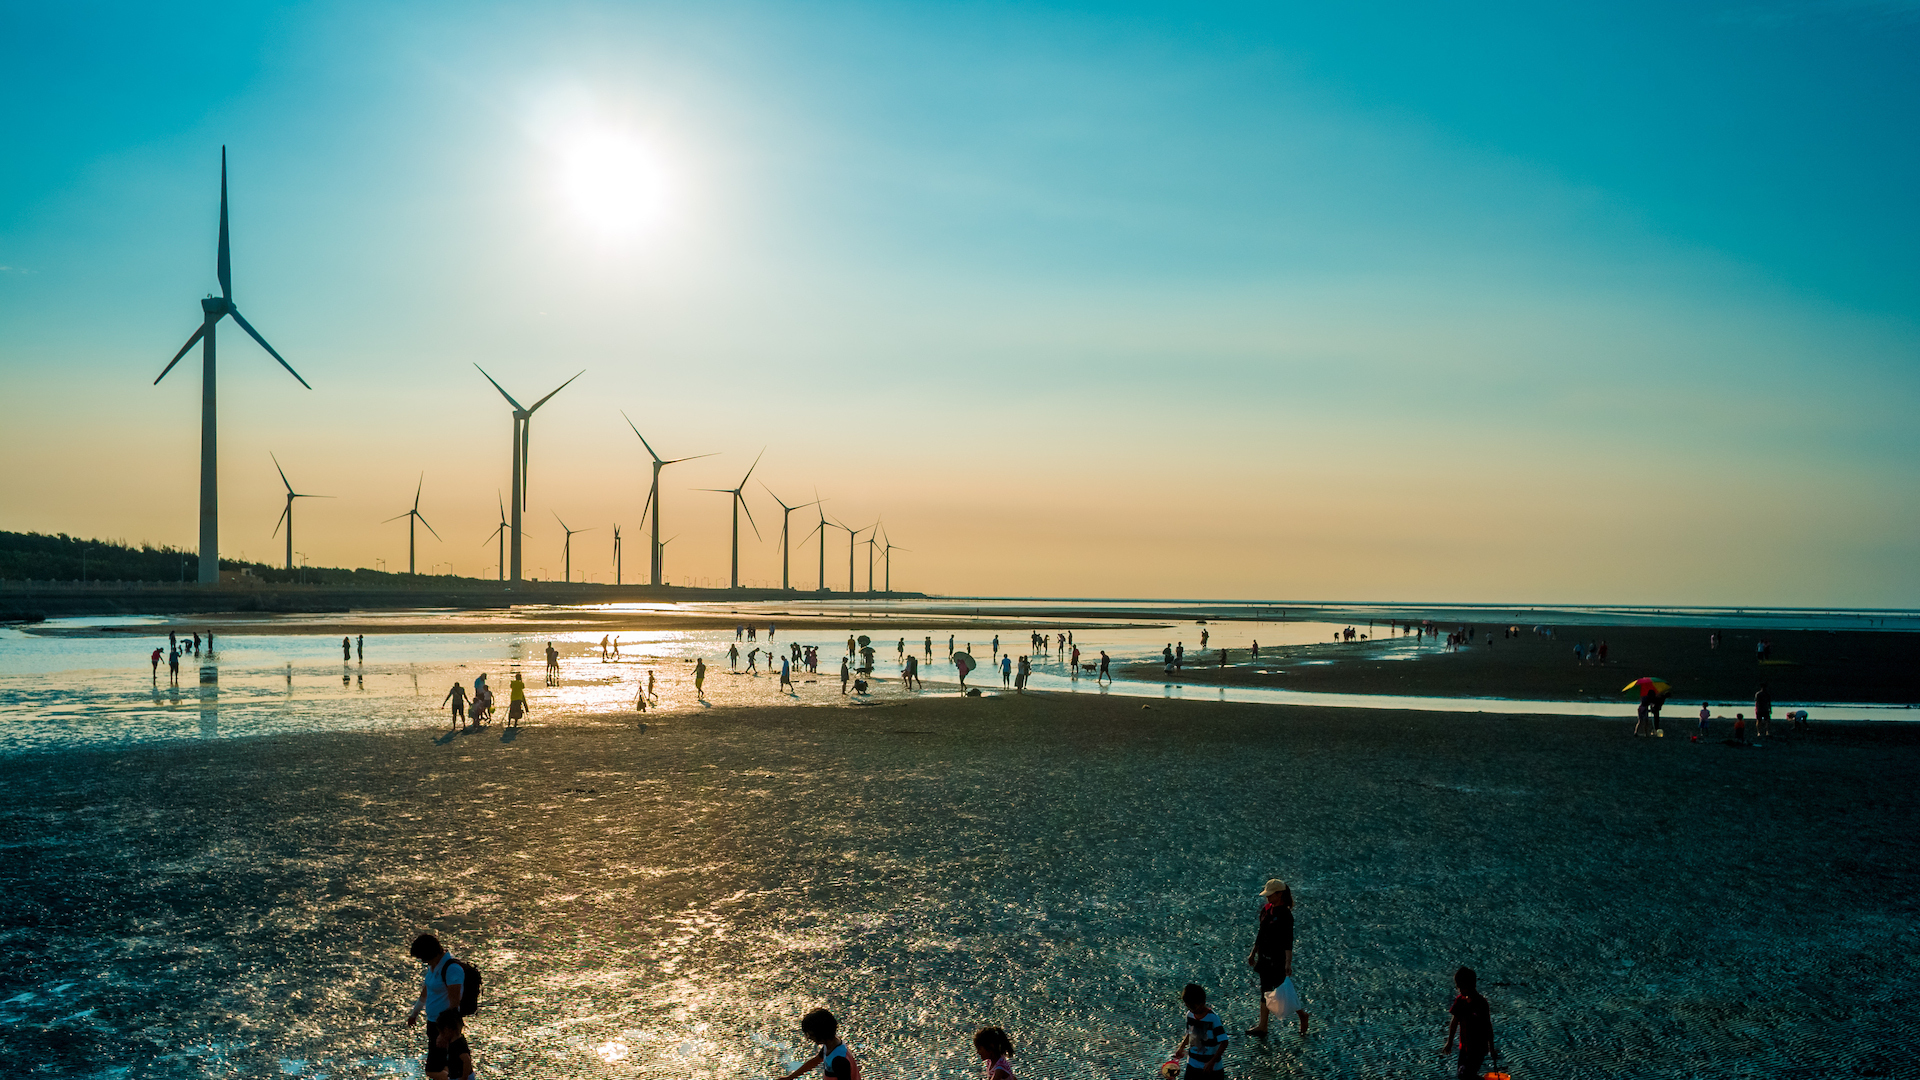 Renewables projects must consider community impact